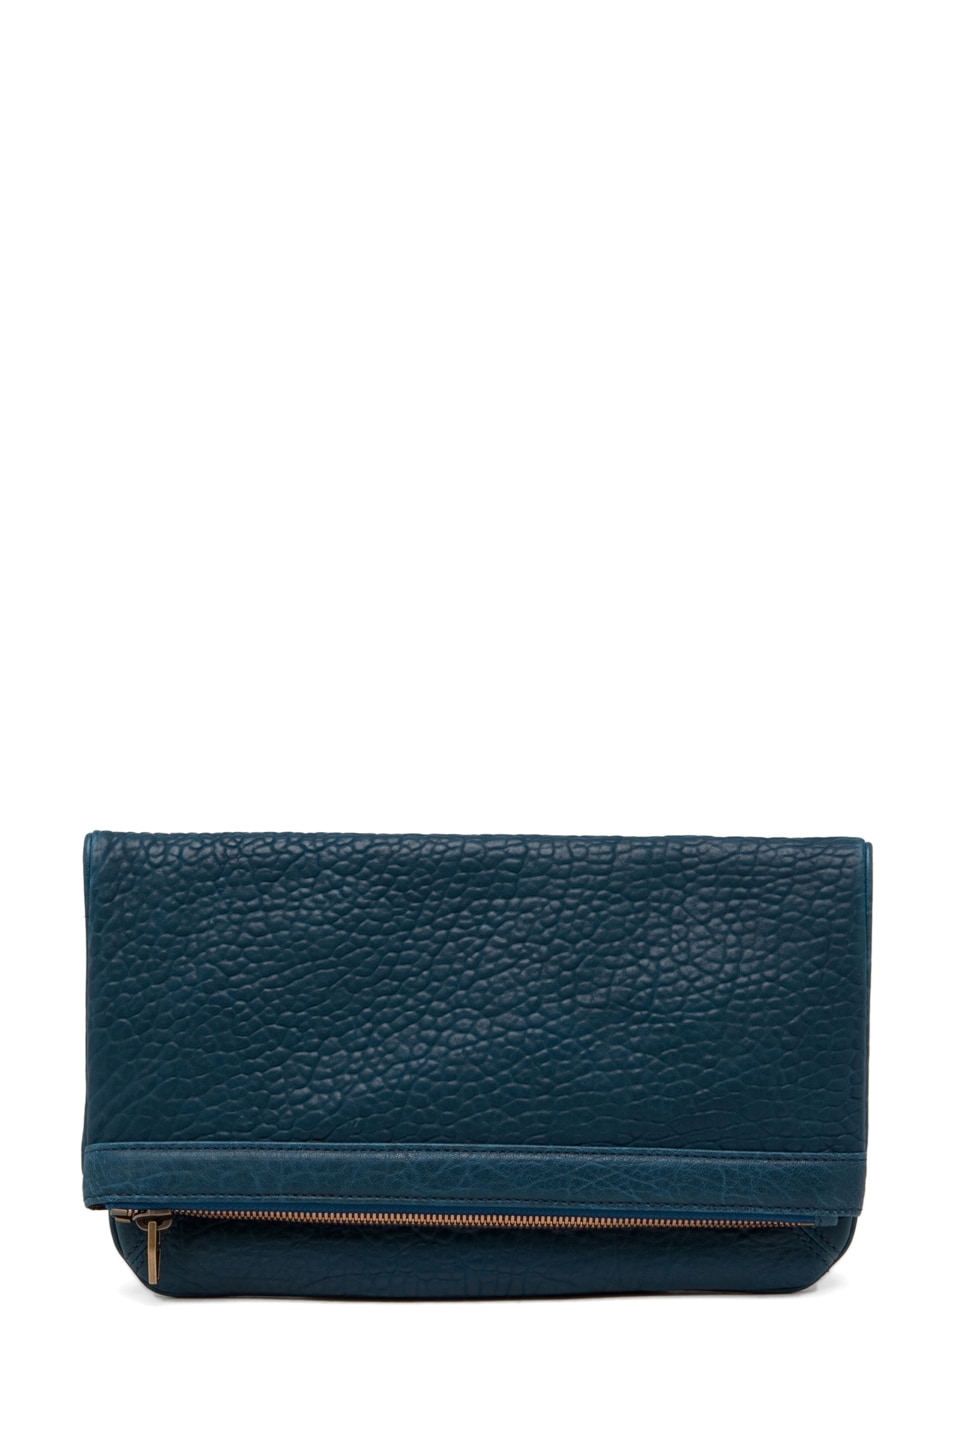 Image 1 of Alexander Wang Dumbo Soft Clutch in Petrol